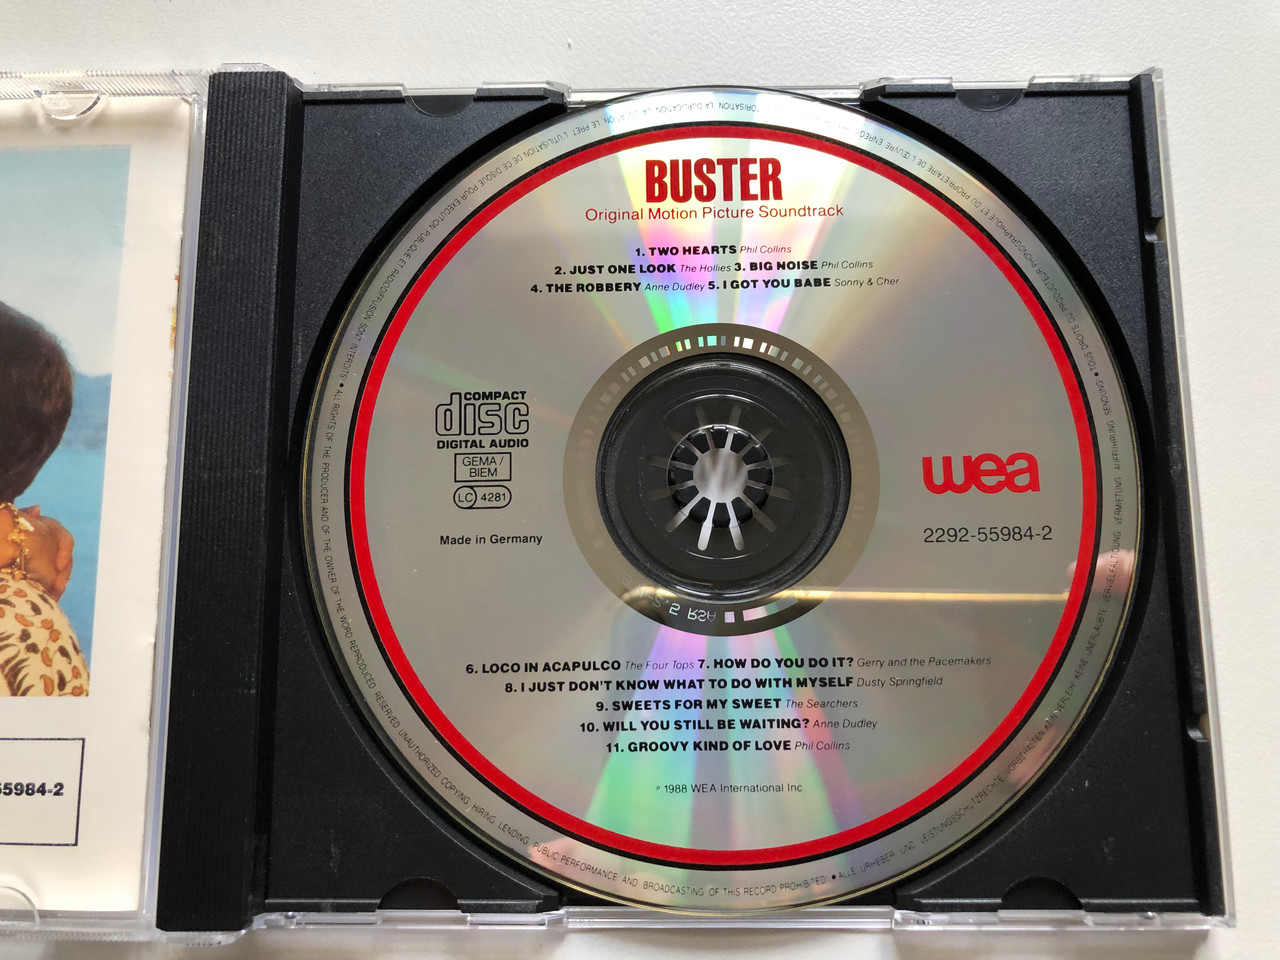 https://cdn10.bigcommerce.com/s-62bdpkt7pb/products/0/images/242233/Buster_The_Original_Motion_Picture_Soundtrack_Featuring_new_tracks_by_Phil_Collins_The_Four_Tops_and_classic_tracks_by_The_Hollies_The_Searchers_Gerry_And_The_Pacemakers_Dusty_Spri_3__62760.1658741677.1280.1280.JPG?c=2&_gl=1*1svvb6m*_ga*MjA2NTIxMjE2MC4xNTkwNTEyNTMy*_ga_WS2VZYPC6G*MTY1ODczMDA4My40OTYuMS4xNjU4NzQxMzkxLjEy